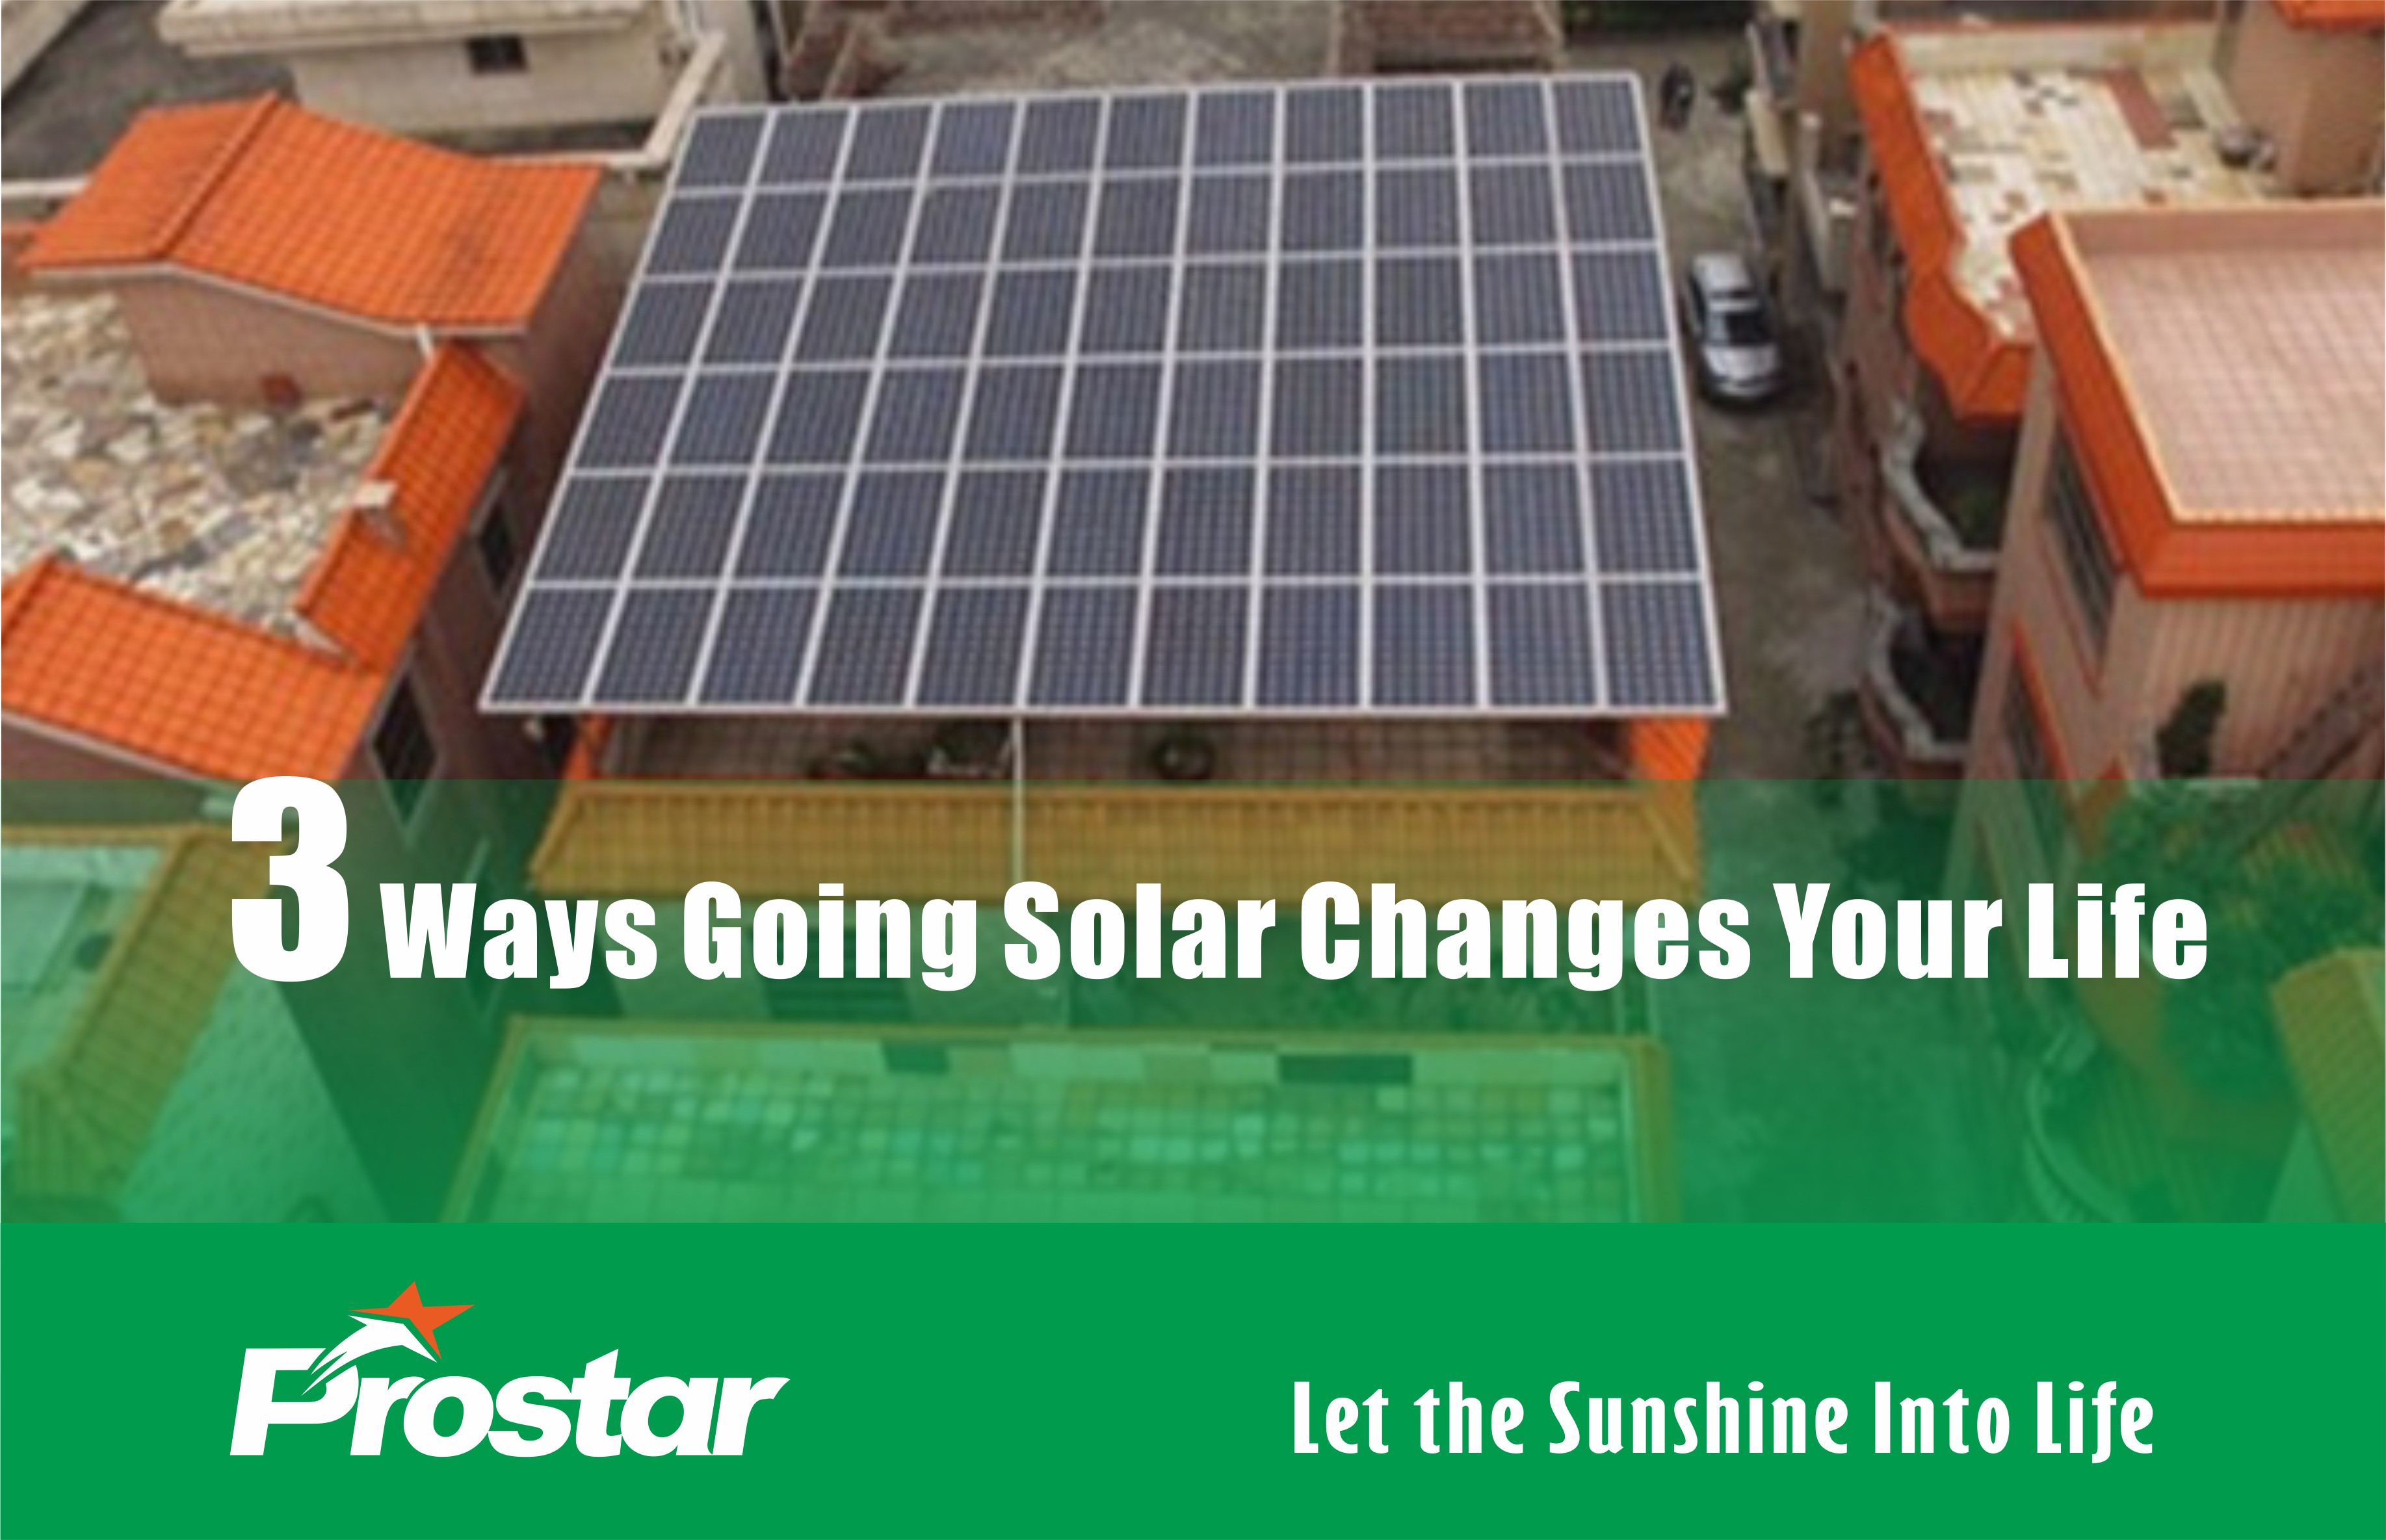 3 Ways Going Solar Changes Your Life